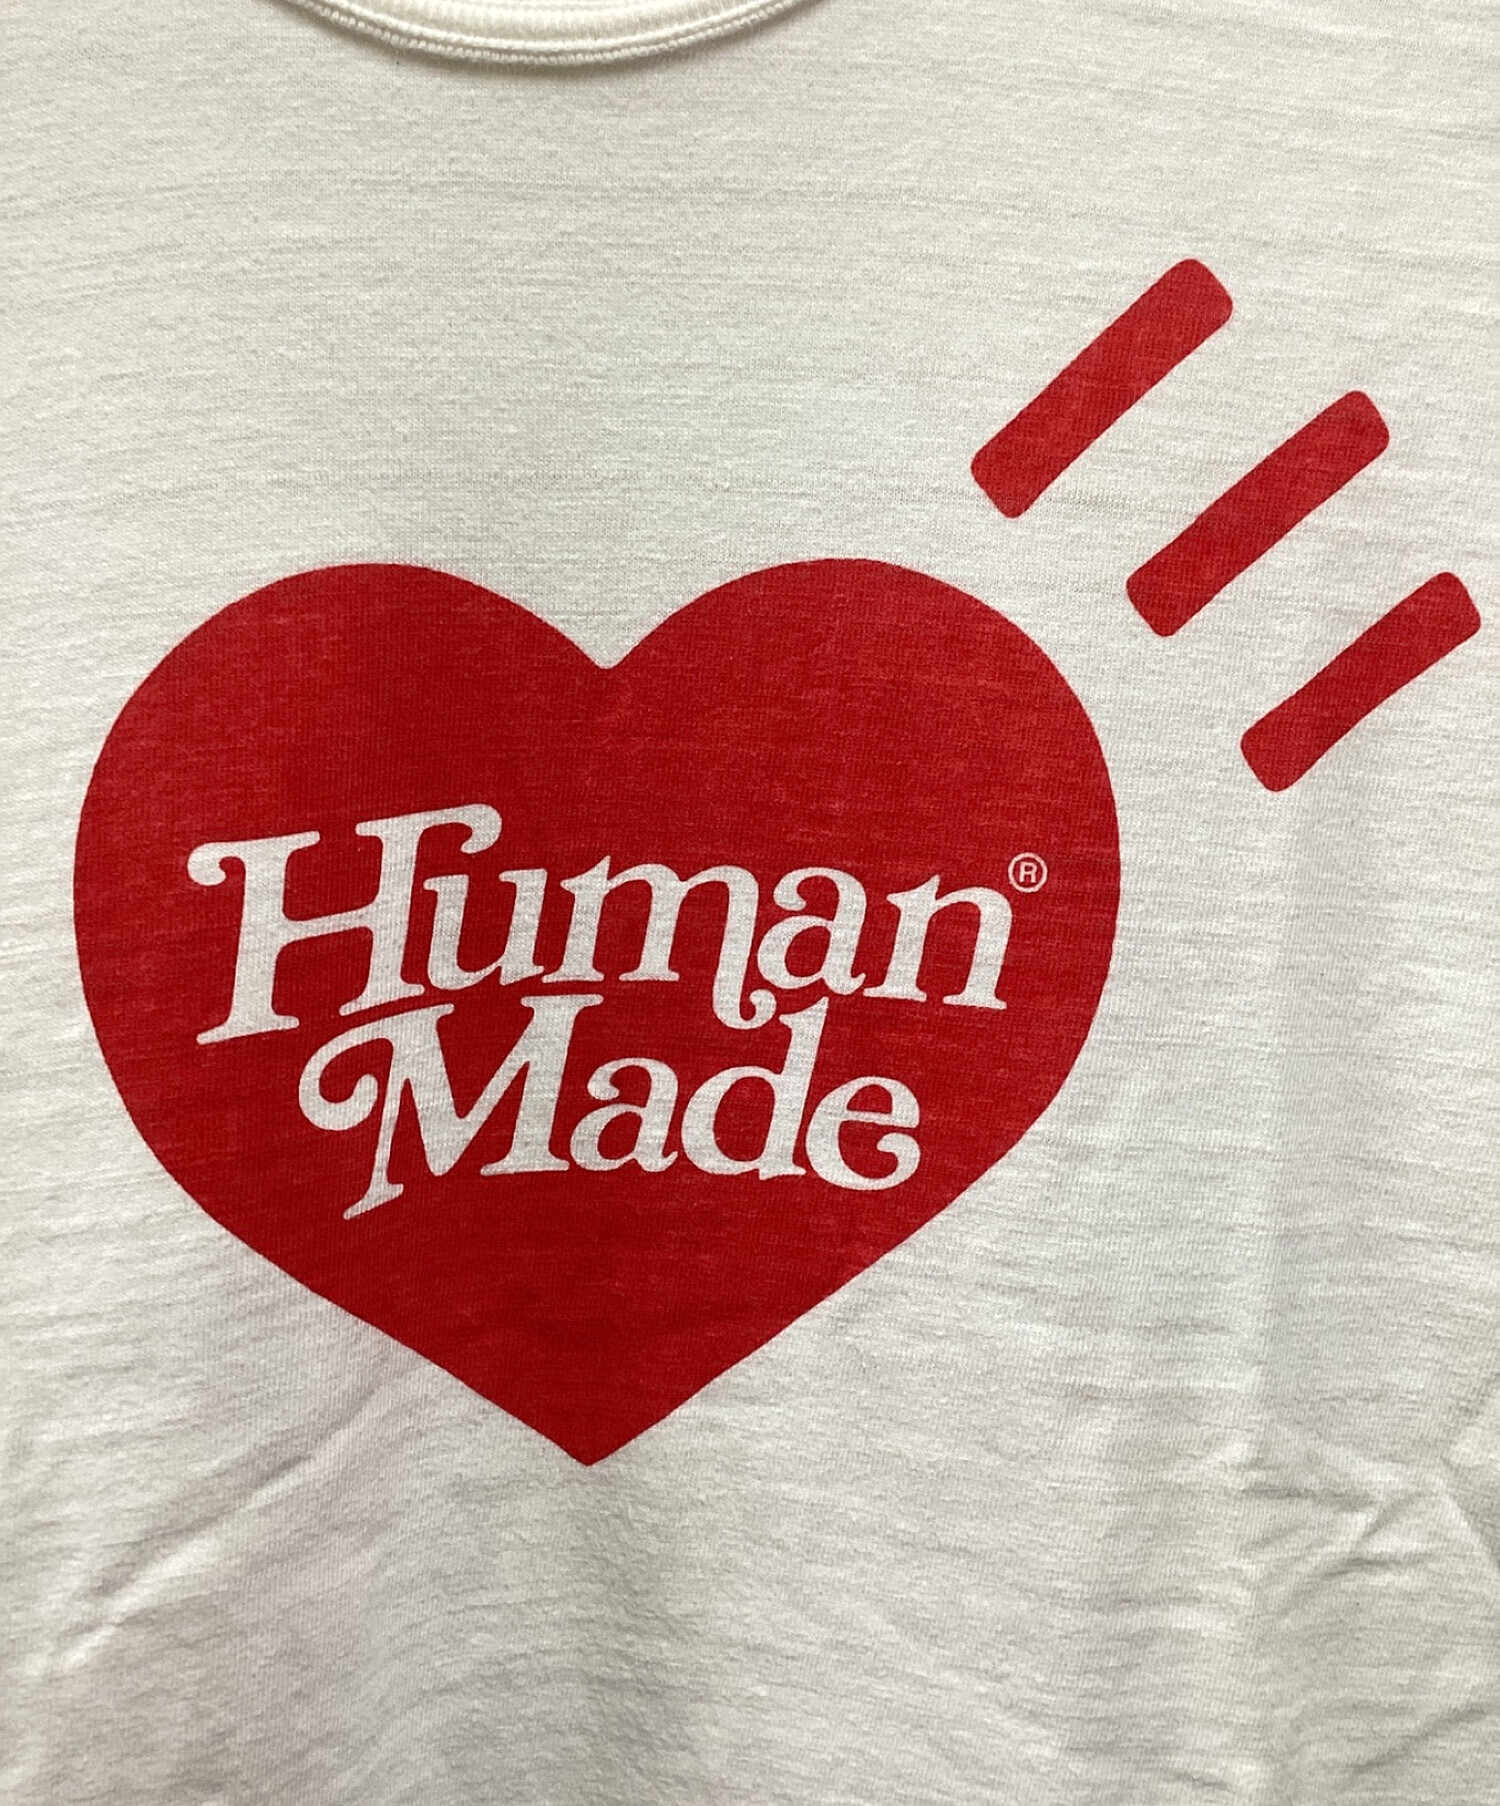 SALE HUMAN MADE girls don'tcry プリントTシャツ